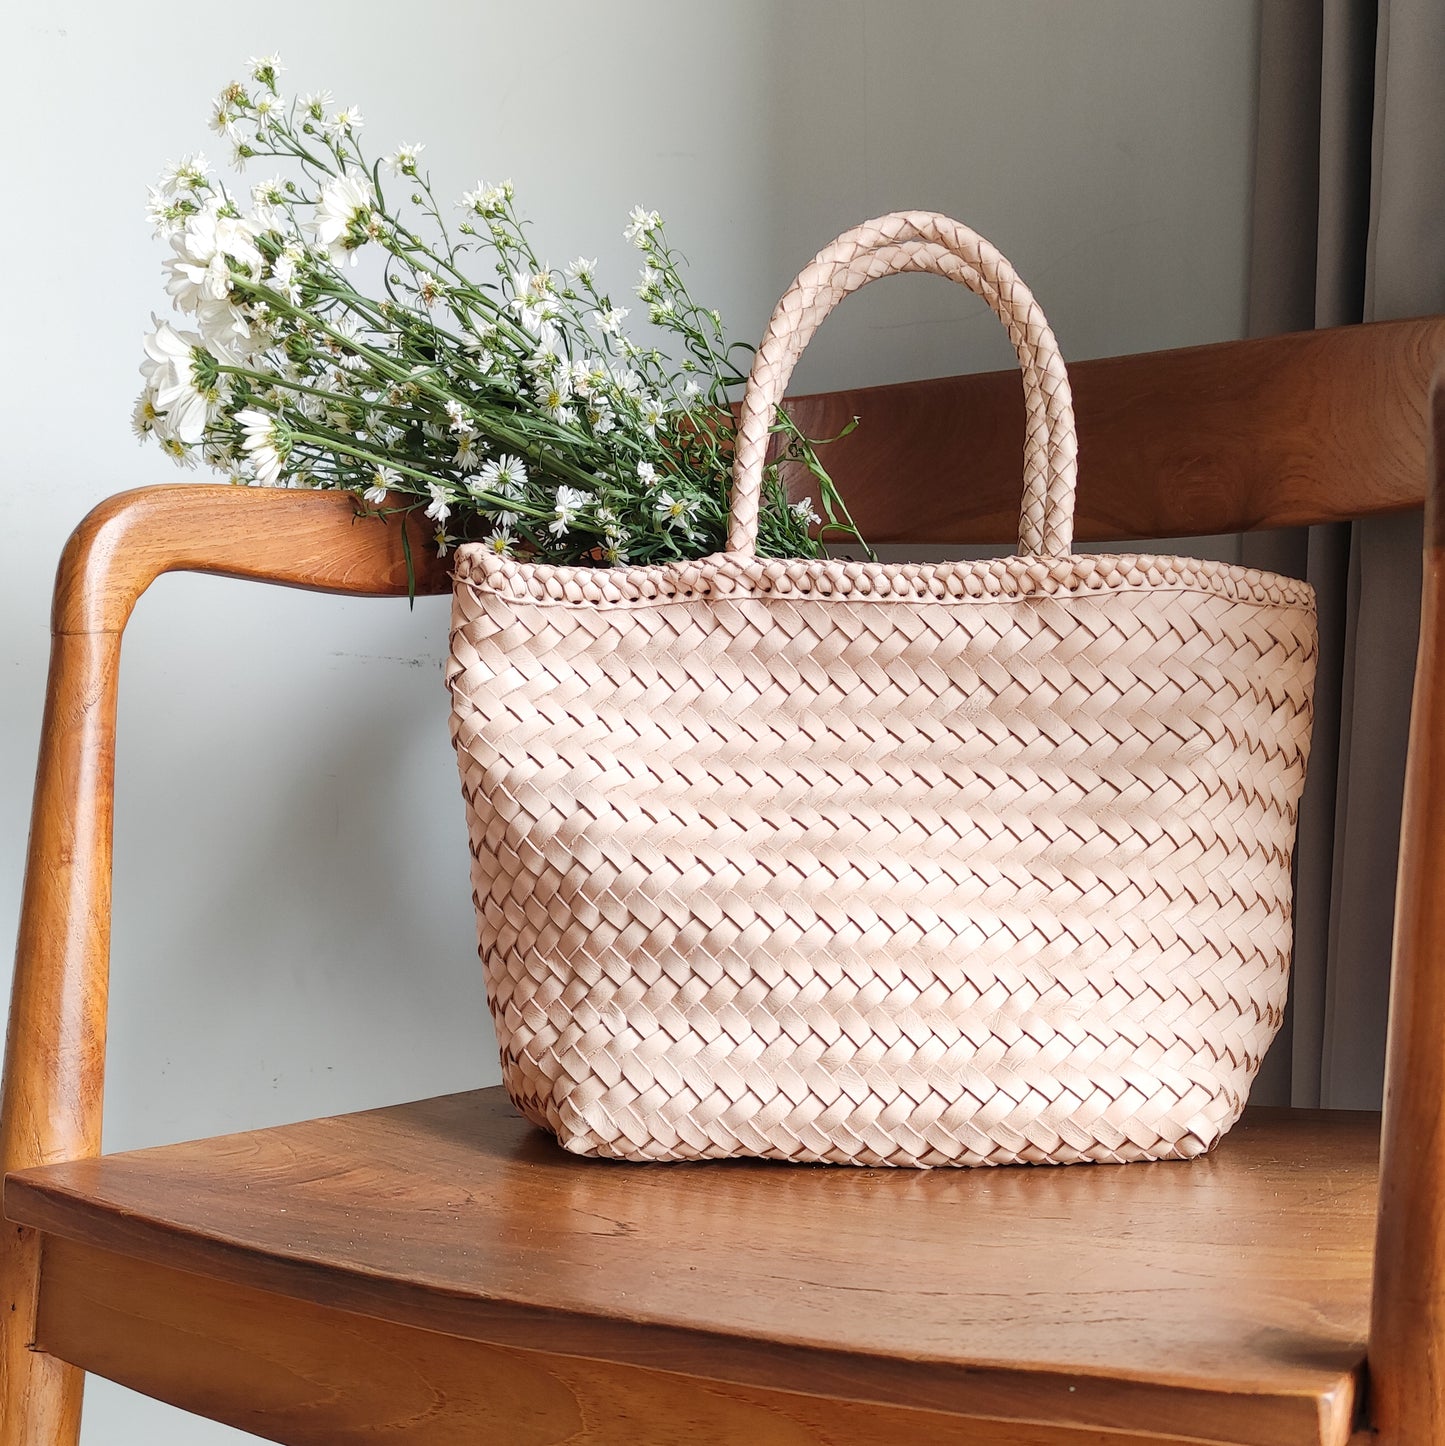 A woven bag placed on a wooden chair is the Cening Woven Bag from Seminyak Leather Bali. This natural blush colored bag is made of vegtanned leather which is shaped using a woven method to form a strong and beautiful bag.